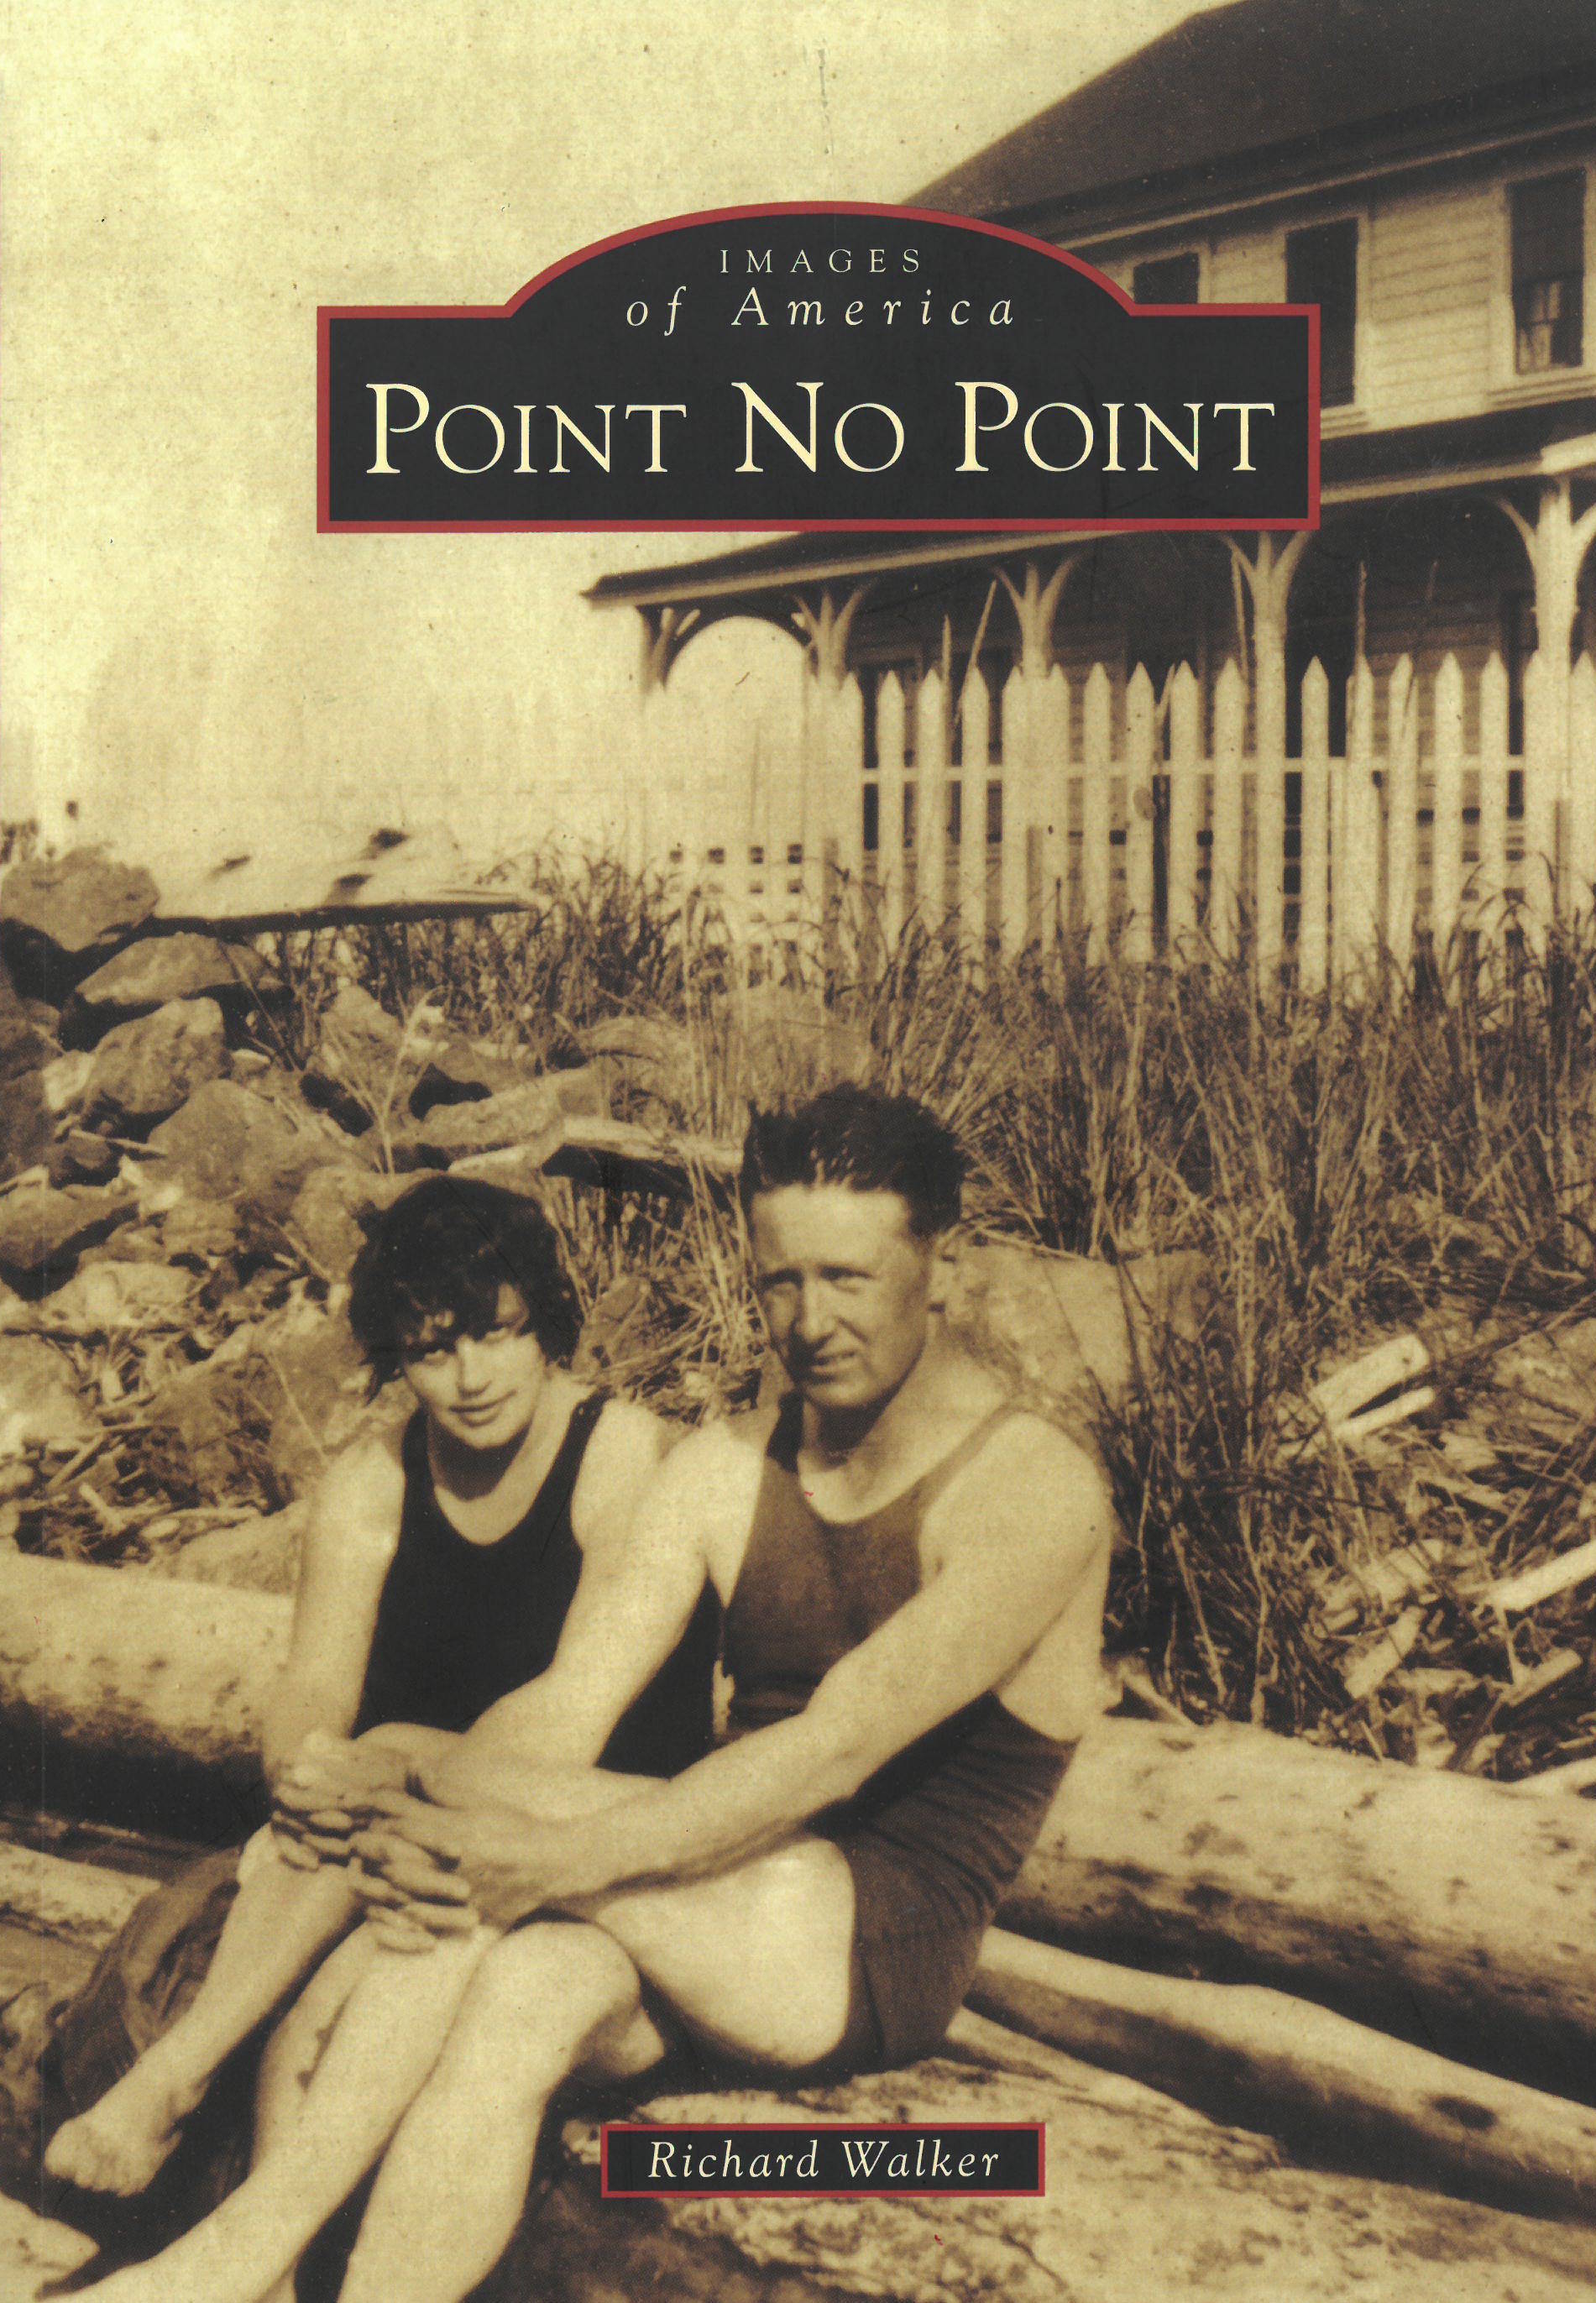 Former North Kitsap Herald editor pens history of Point No Point